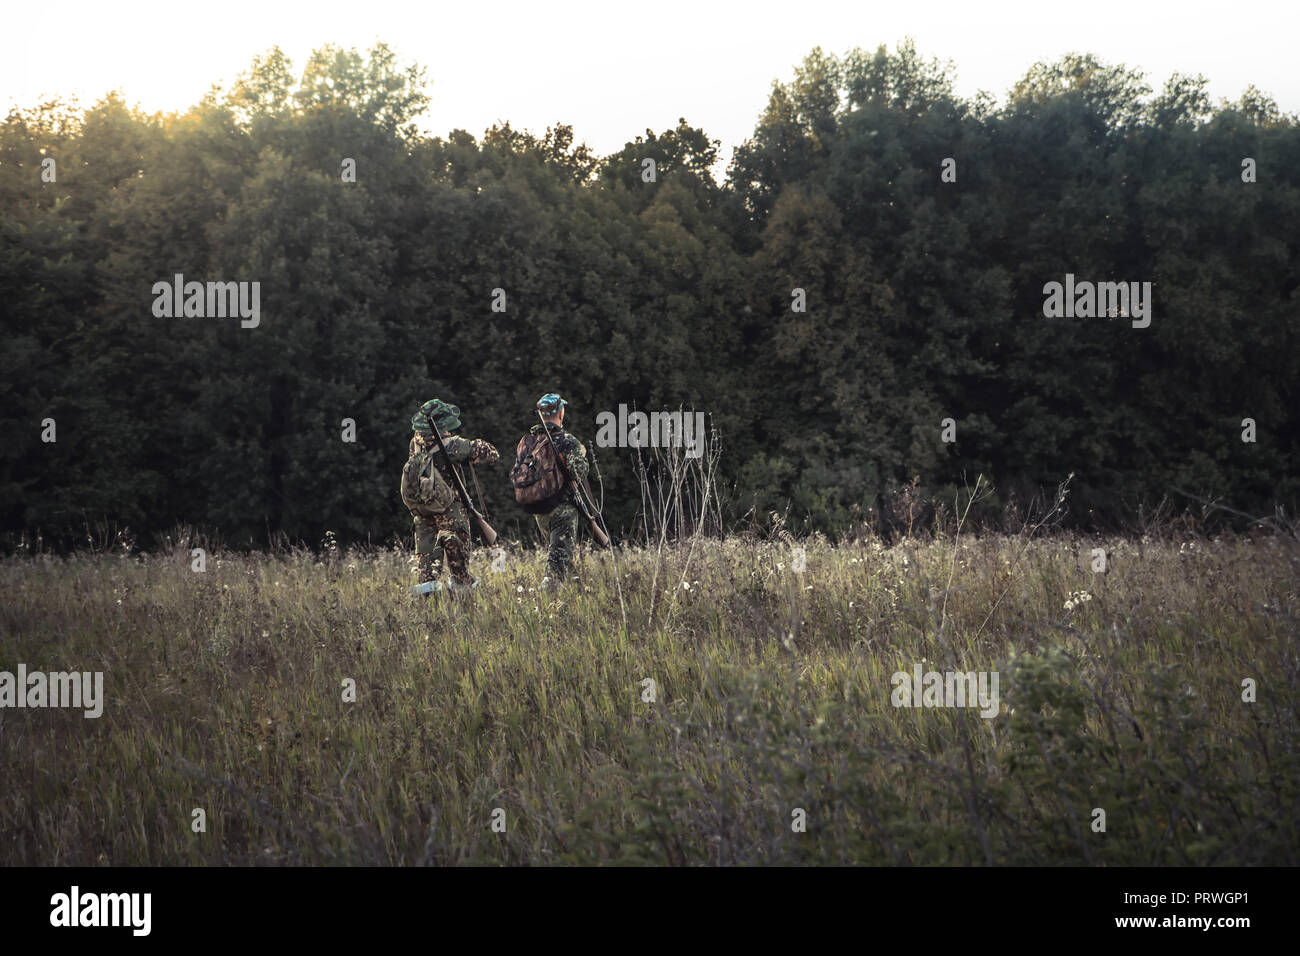 Hunting hunters in  rural field nearby forest at sunset during hunting season Stock Photo